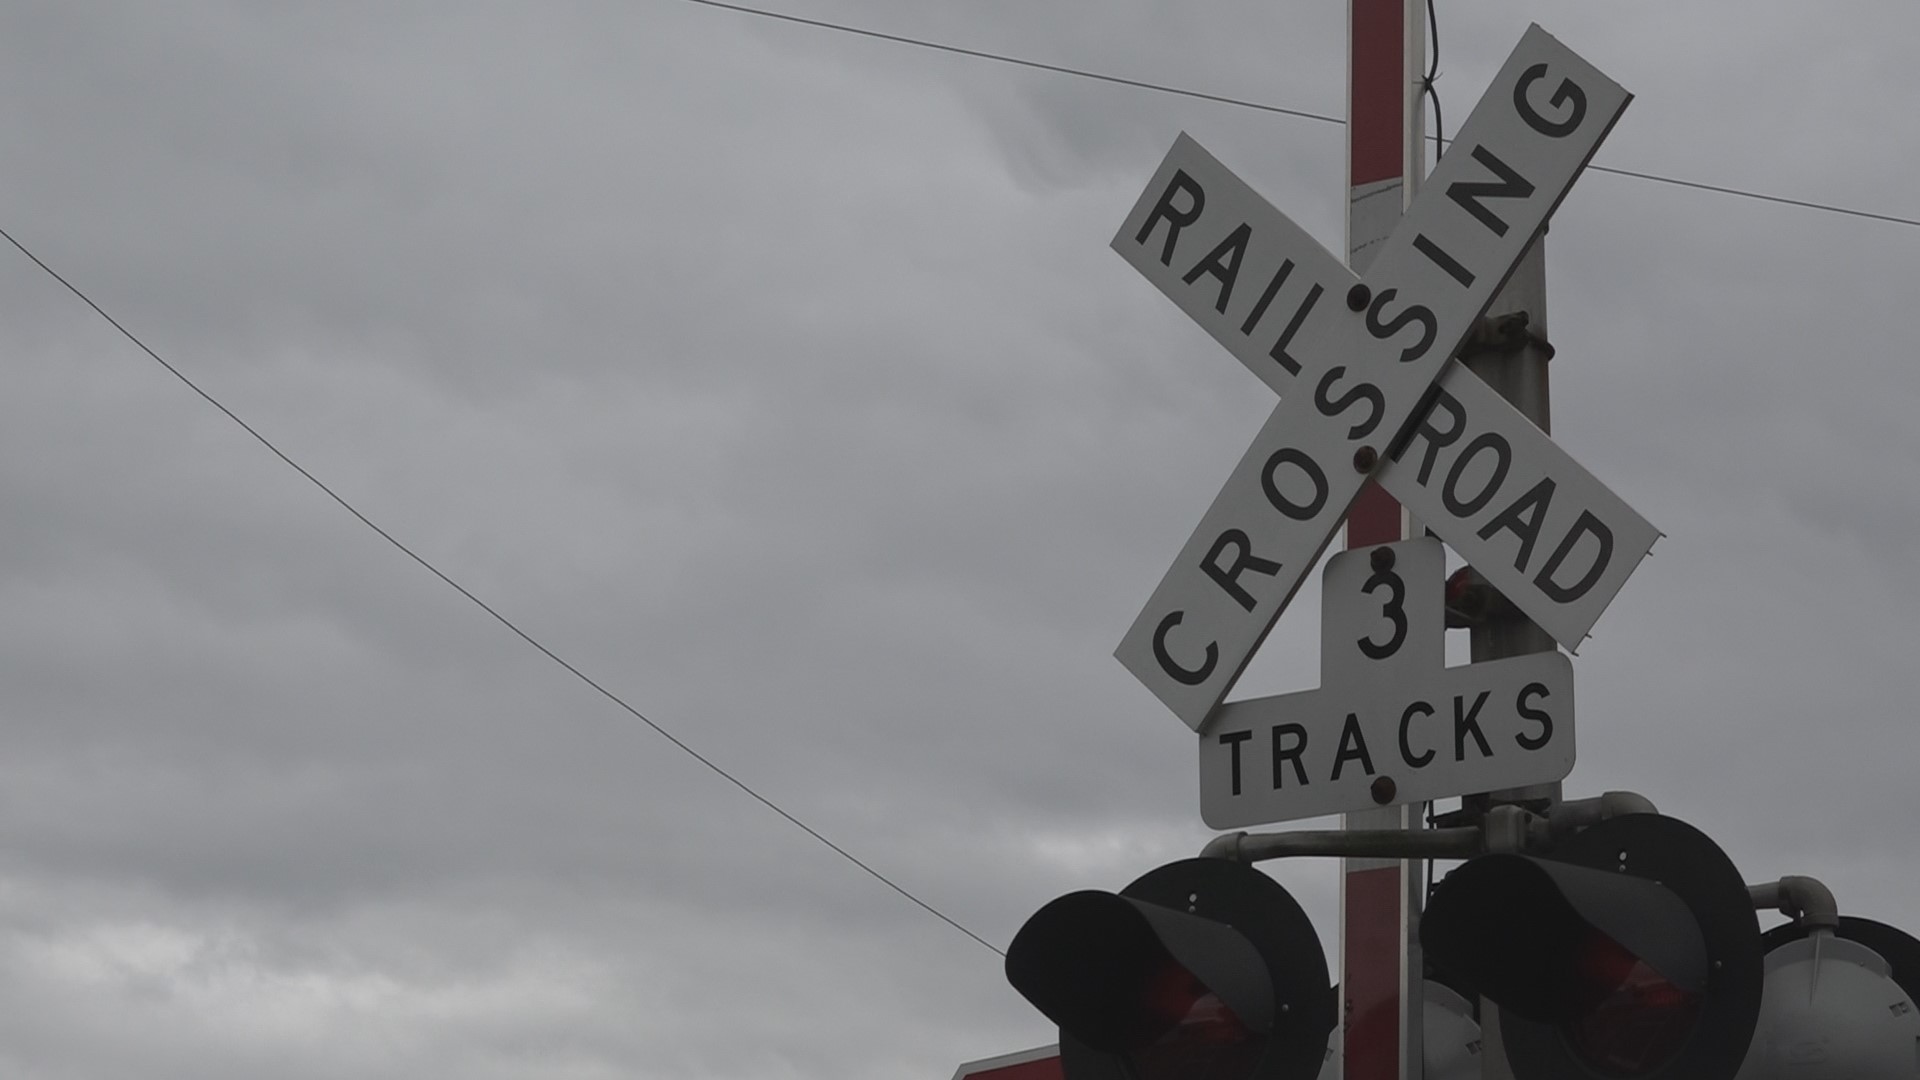 As part of the Quick Response project, Georgia Department of Transportation will install dynamic message signs at railroad crossings.